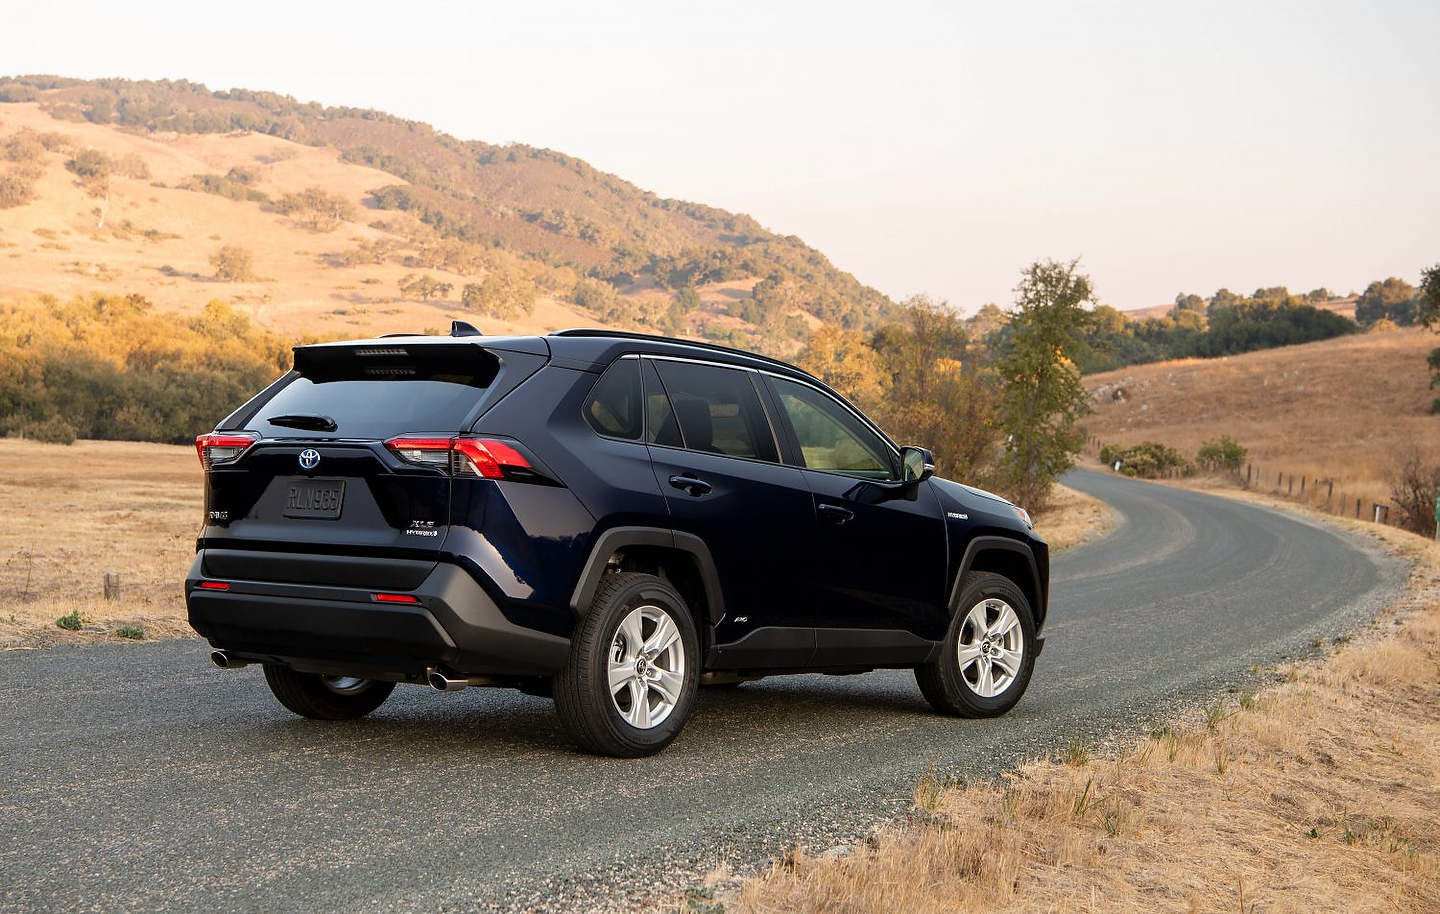 The 2021 Toyota RAV4, in all its glory